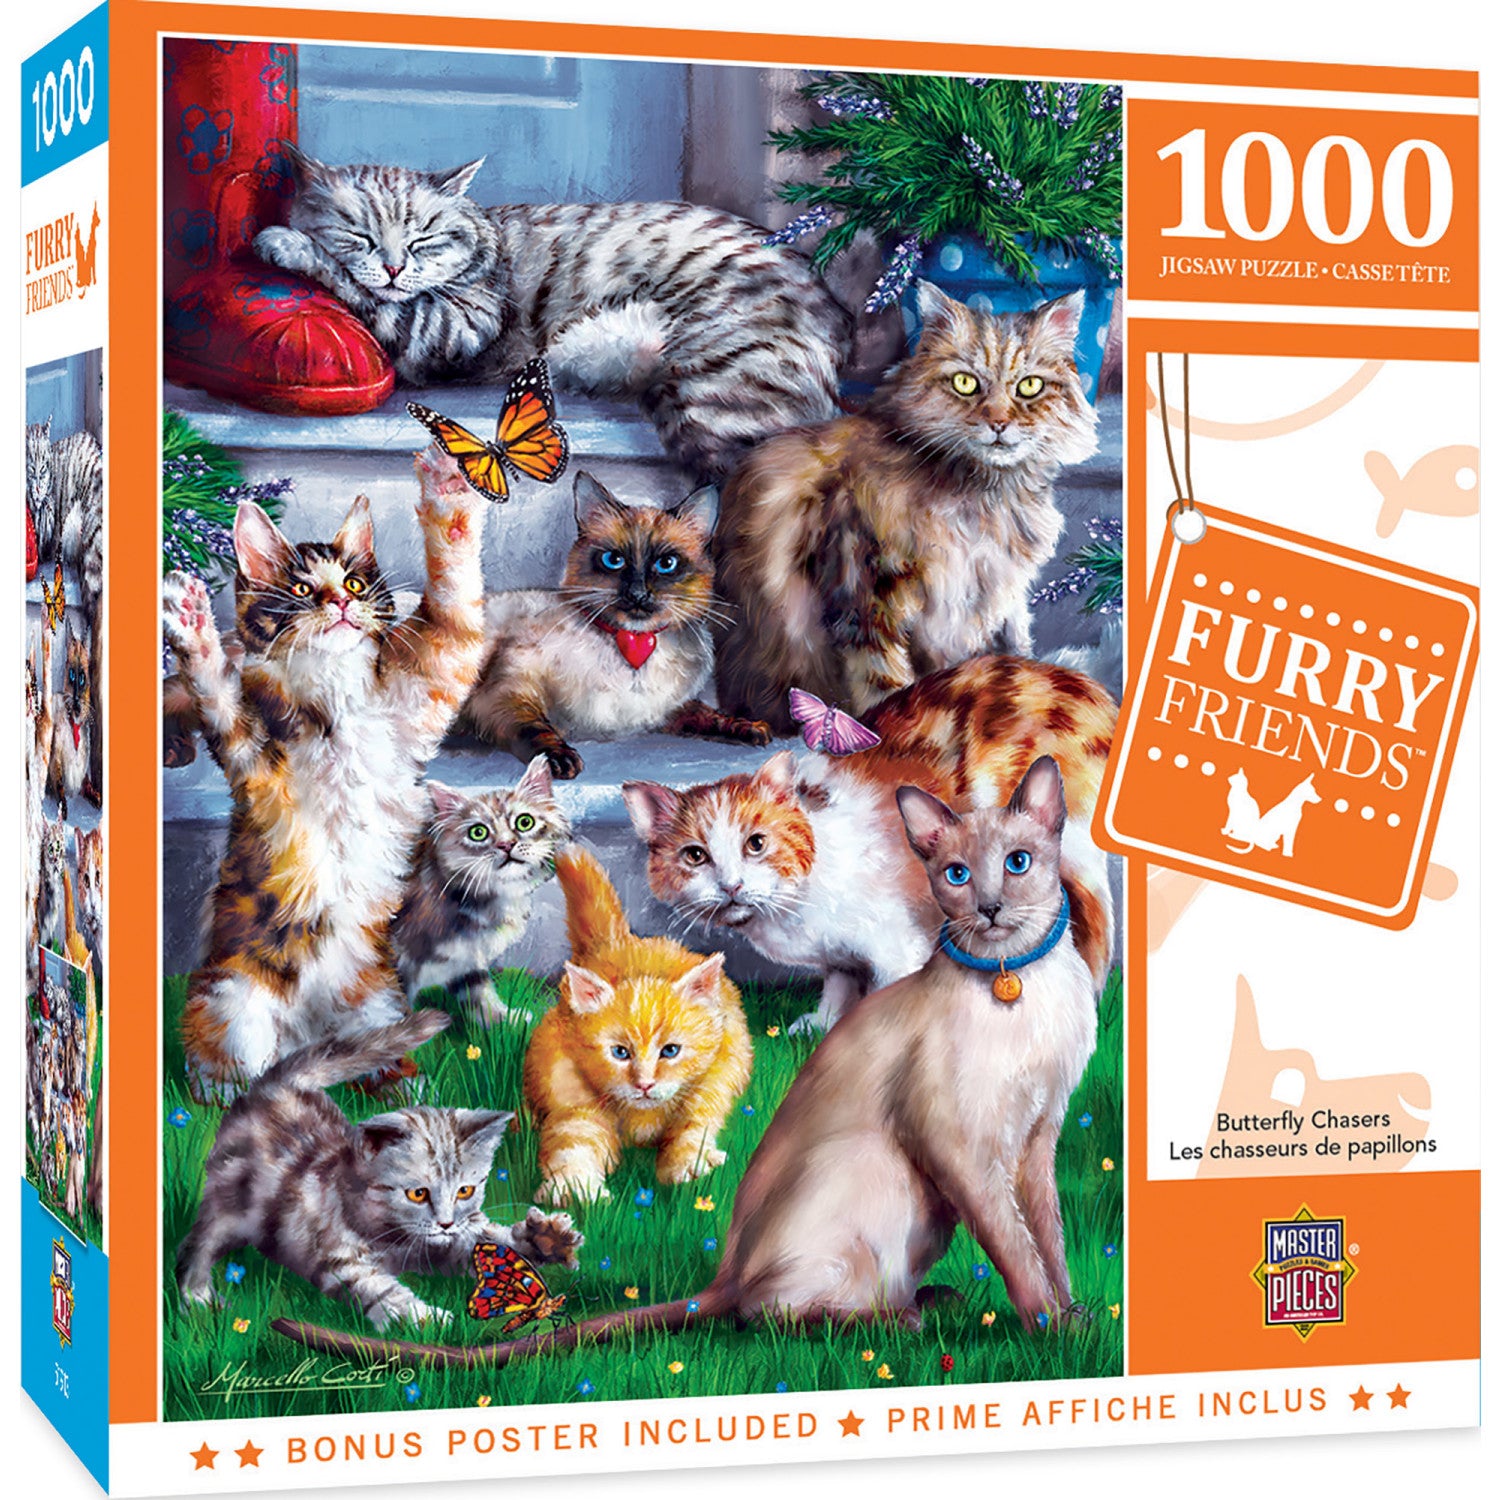 Furry Friends - Butterfly Chasers 1000 Piece Jigsaw Puzzle